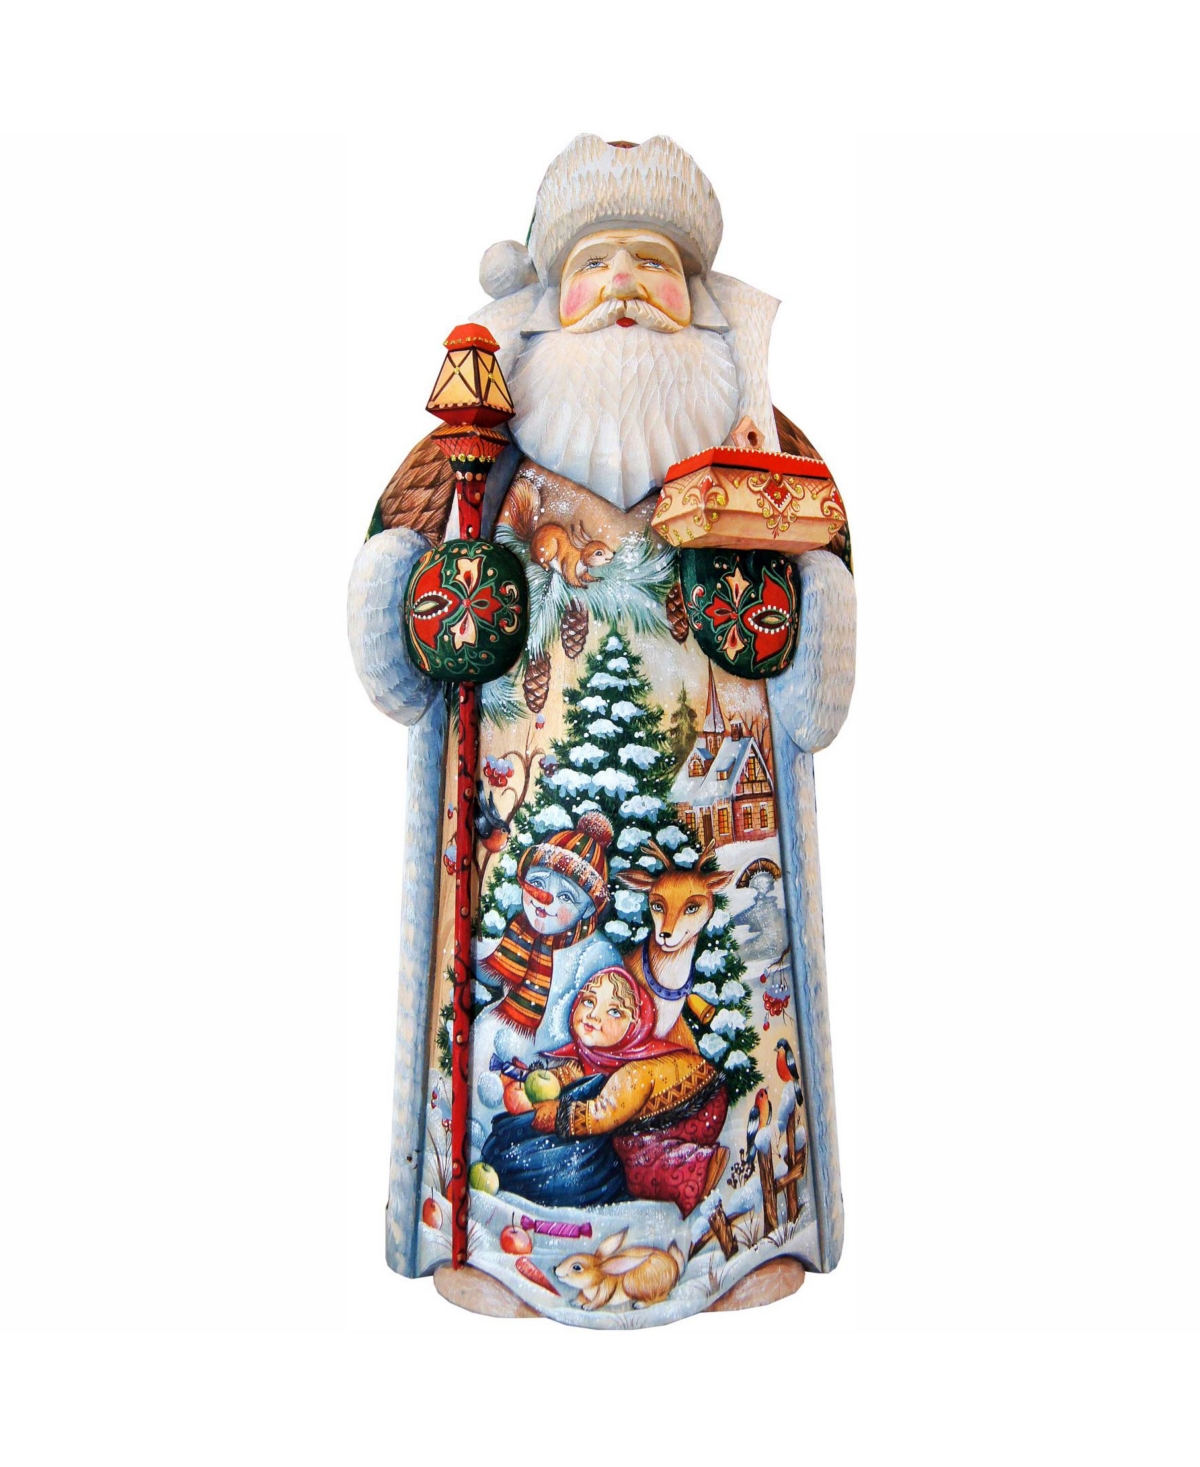 Woodcarved and Hand Painted Snow Play Santa Claus Figurine - Multi